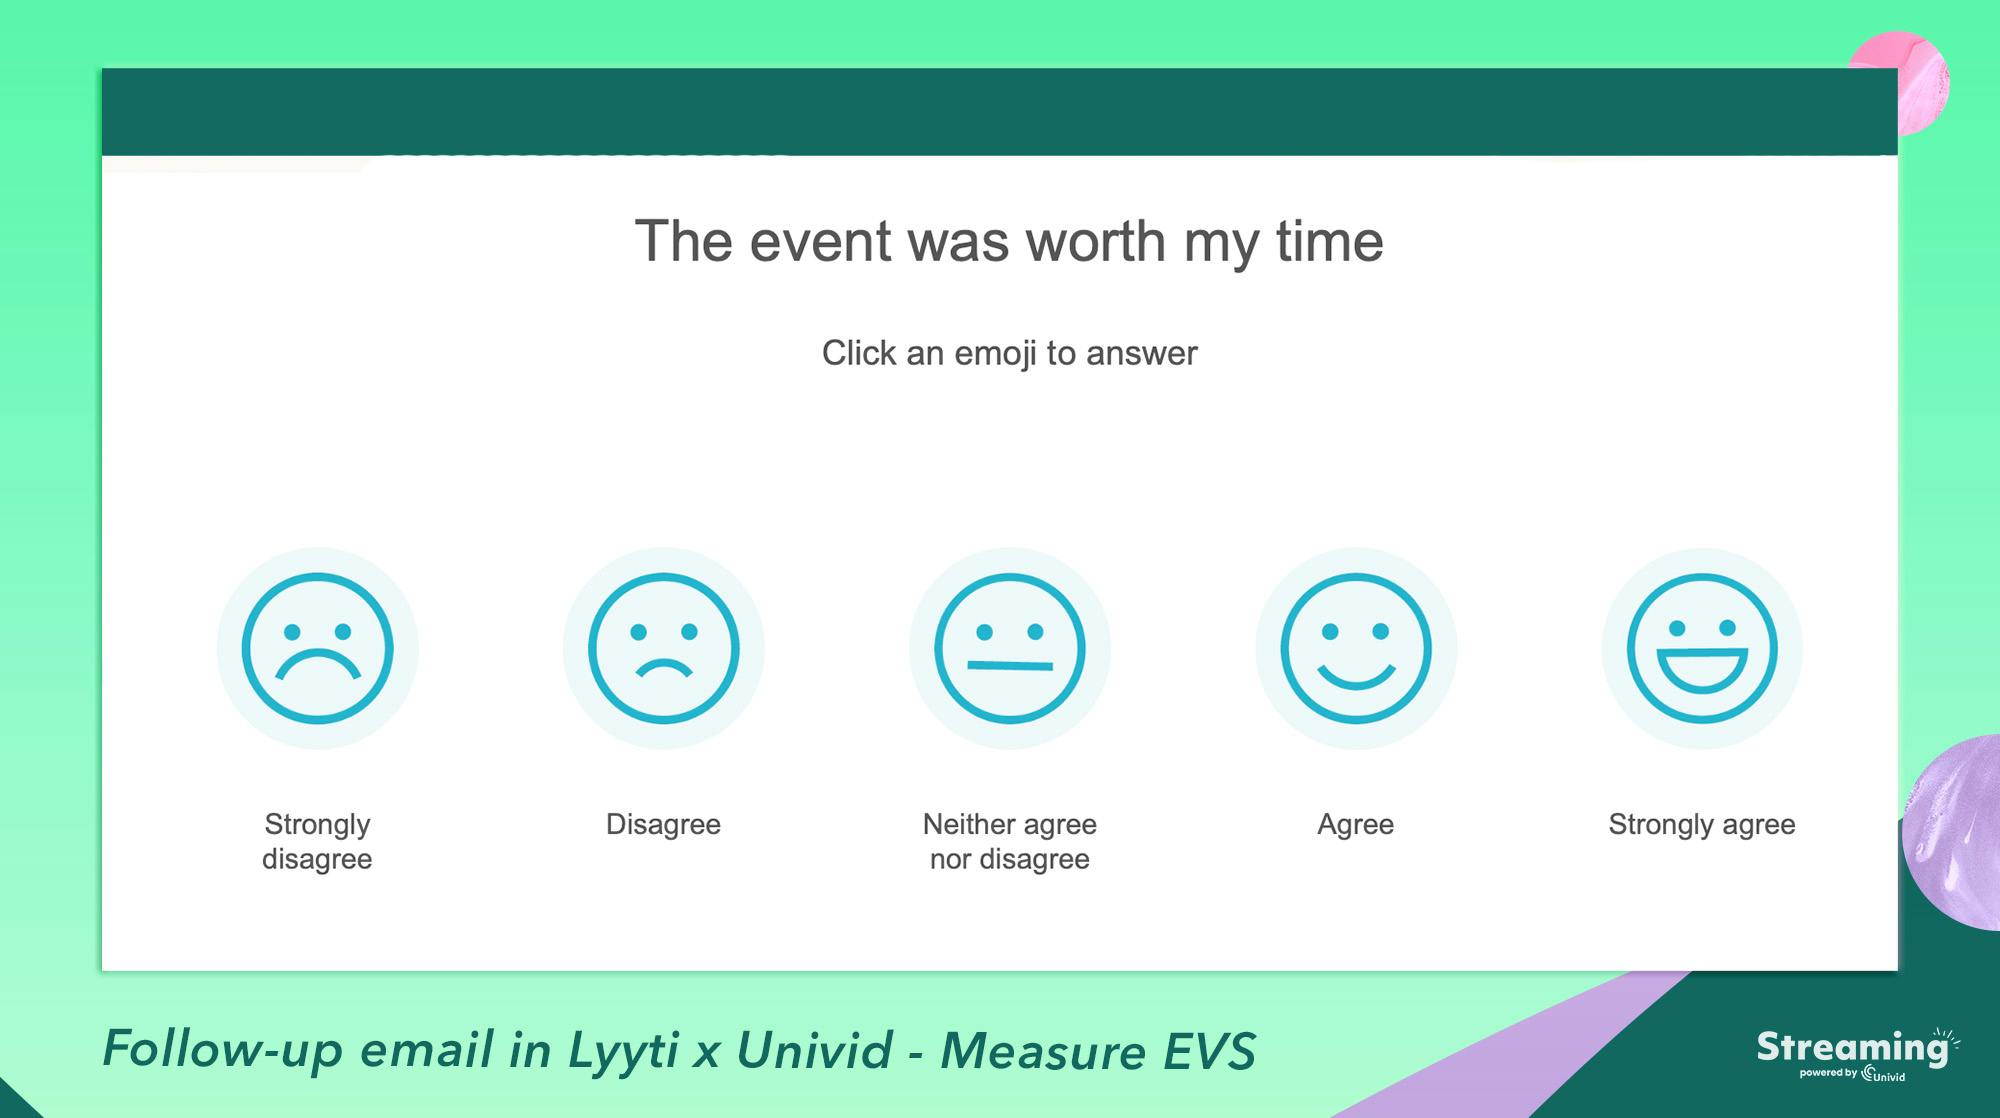 Follow-up email - How to measure Experience Value Score (EVS)